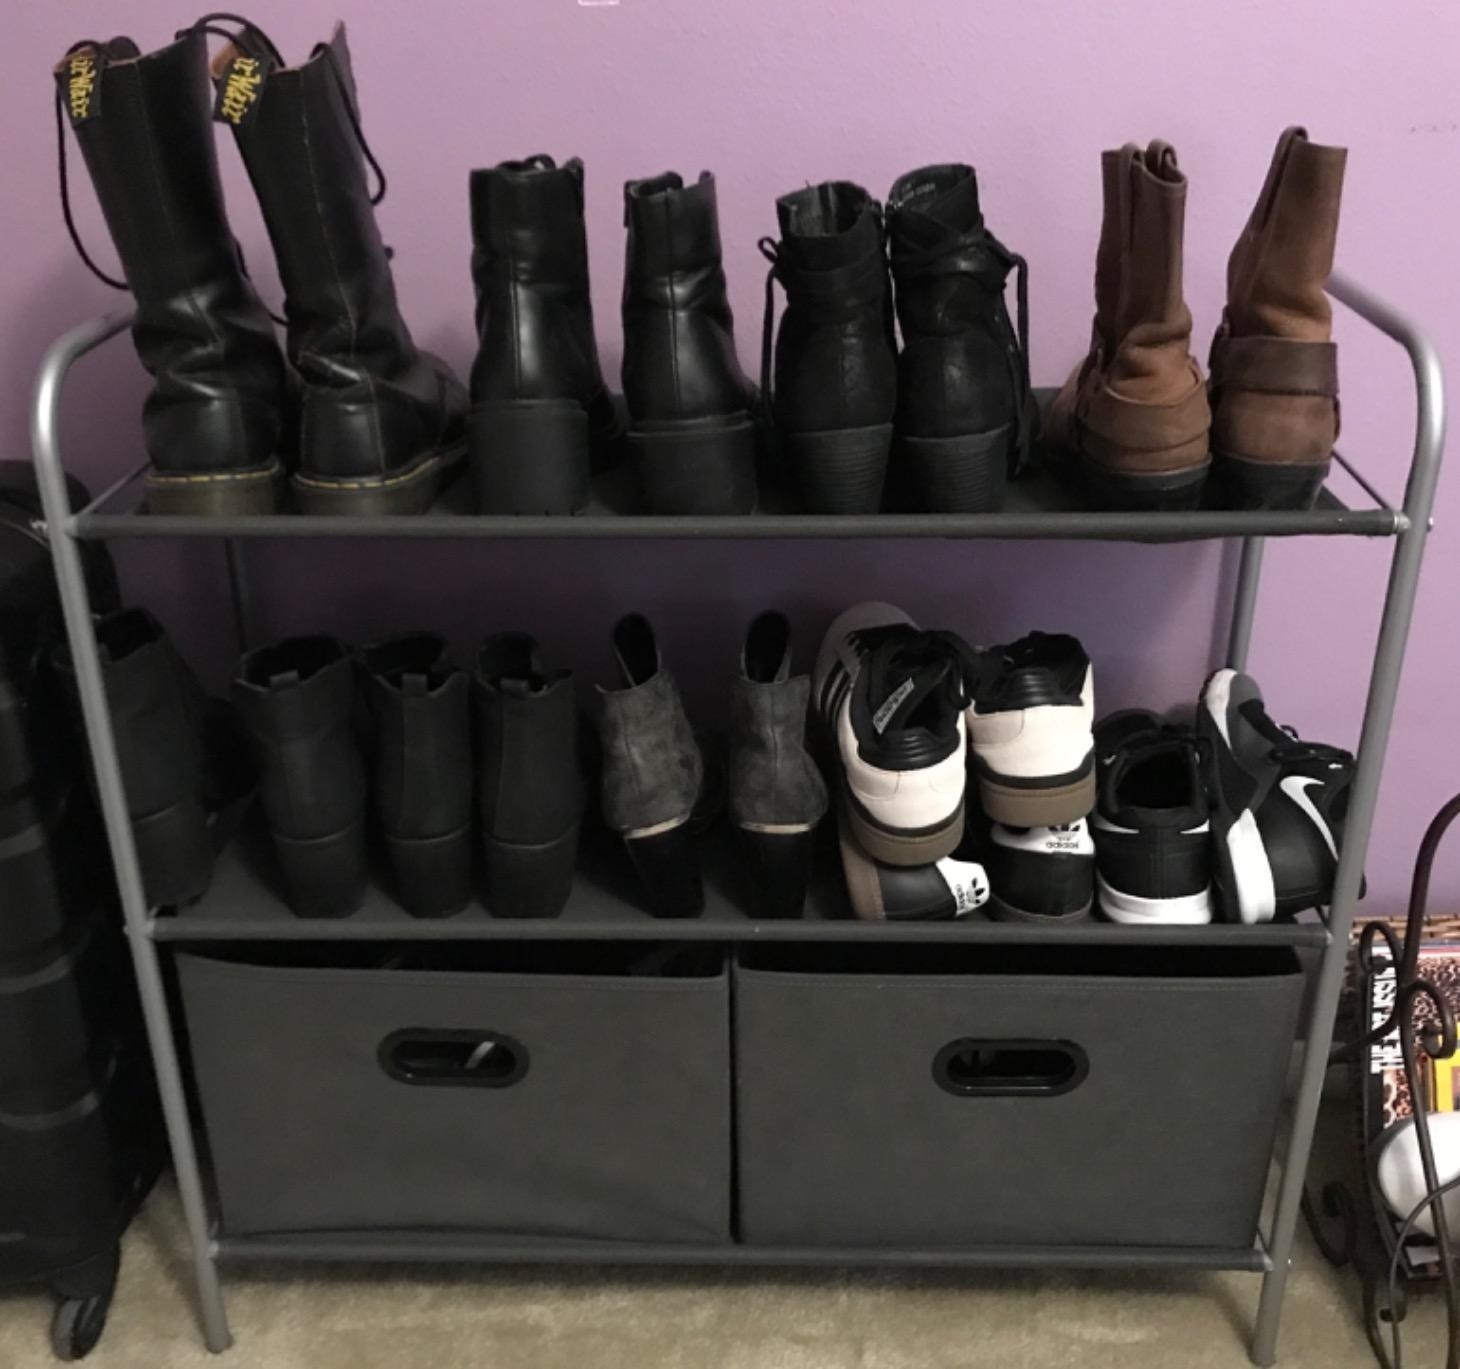 Reviewer photo of shoe rack with storage bins placed in closet